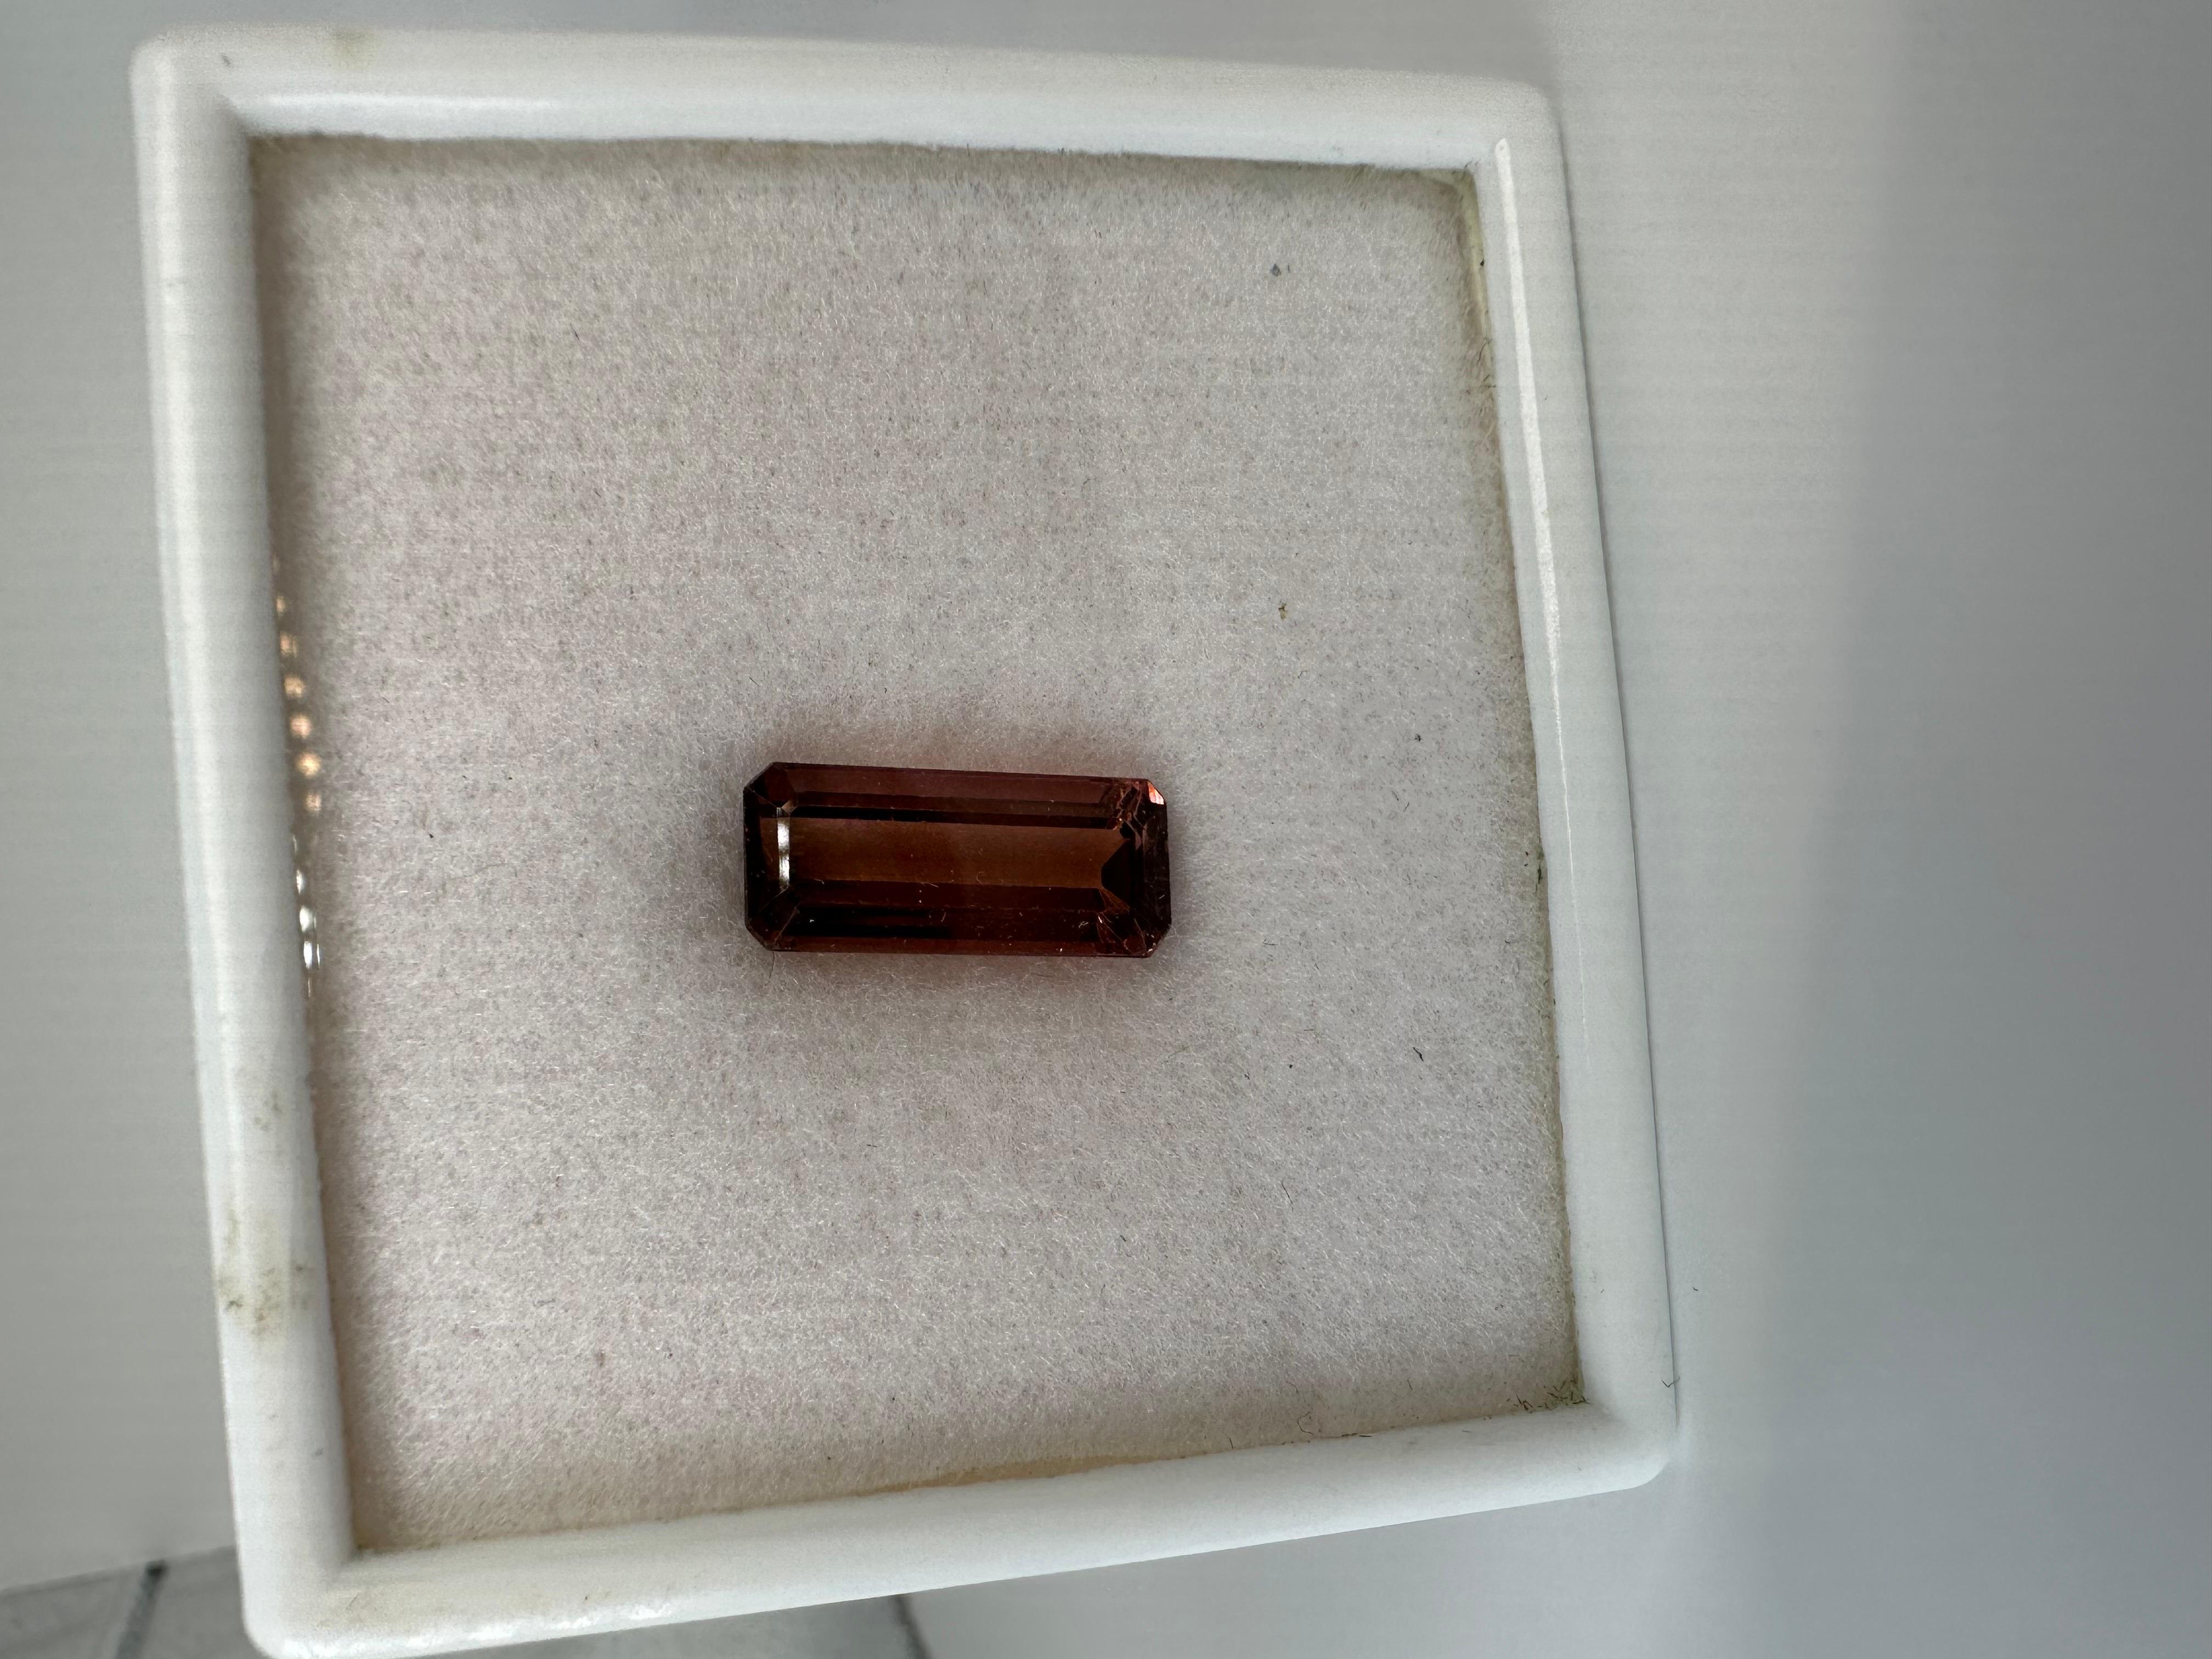 Natural pink tourmaline, very good quality, beautiful sparkle, will come with certificate of authenticity.

NATURAL GEMSTONE(S): Tourmaline
Clarity/Color: Slightly Included/Pink
Cut: Rectangular
Treatment: none


WHAT YOU GET AT STAMPAR